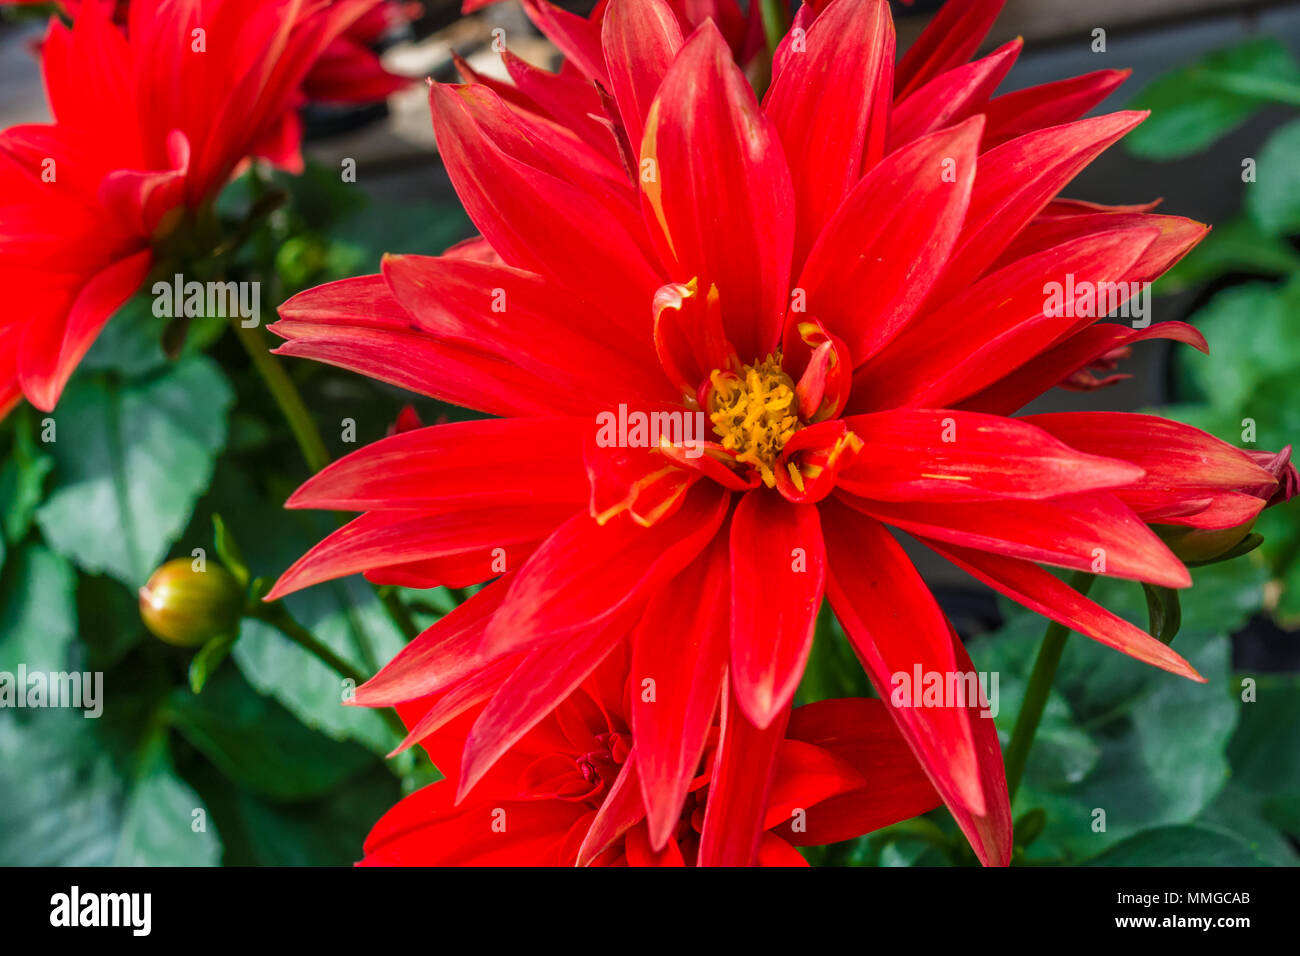 Close up view of common dahlia flower showing vibrant and vivid colors and flower plants Stock Photo